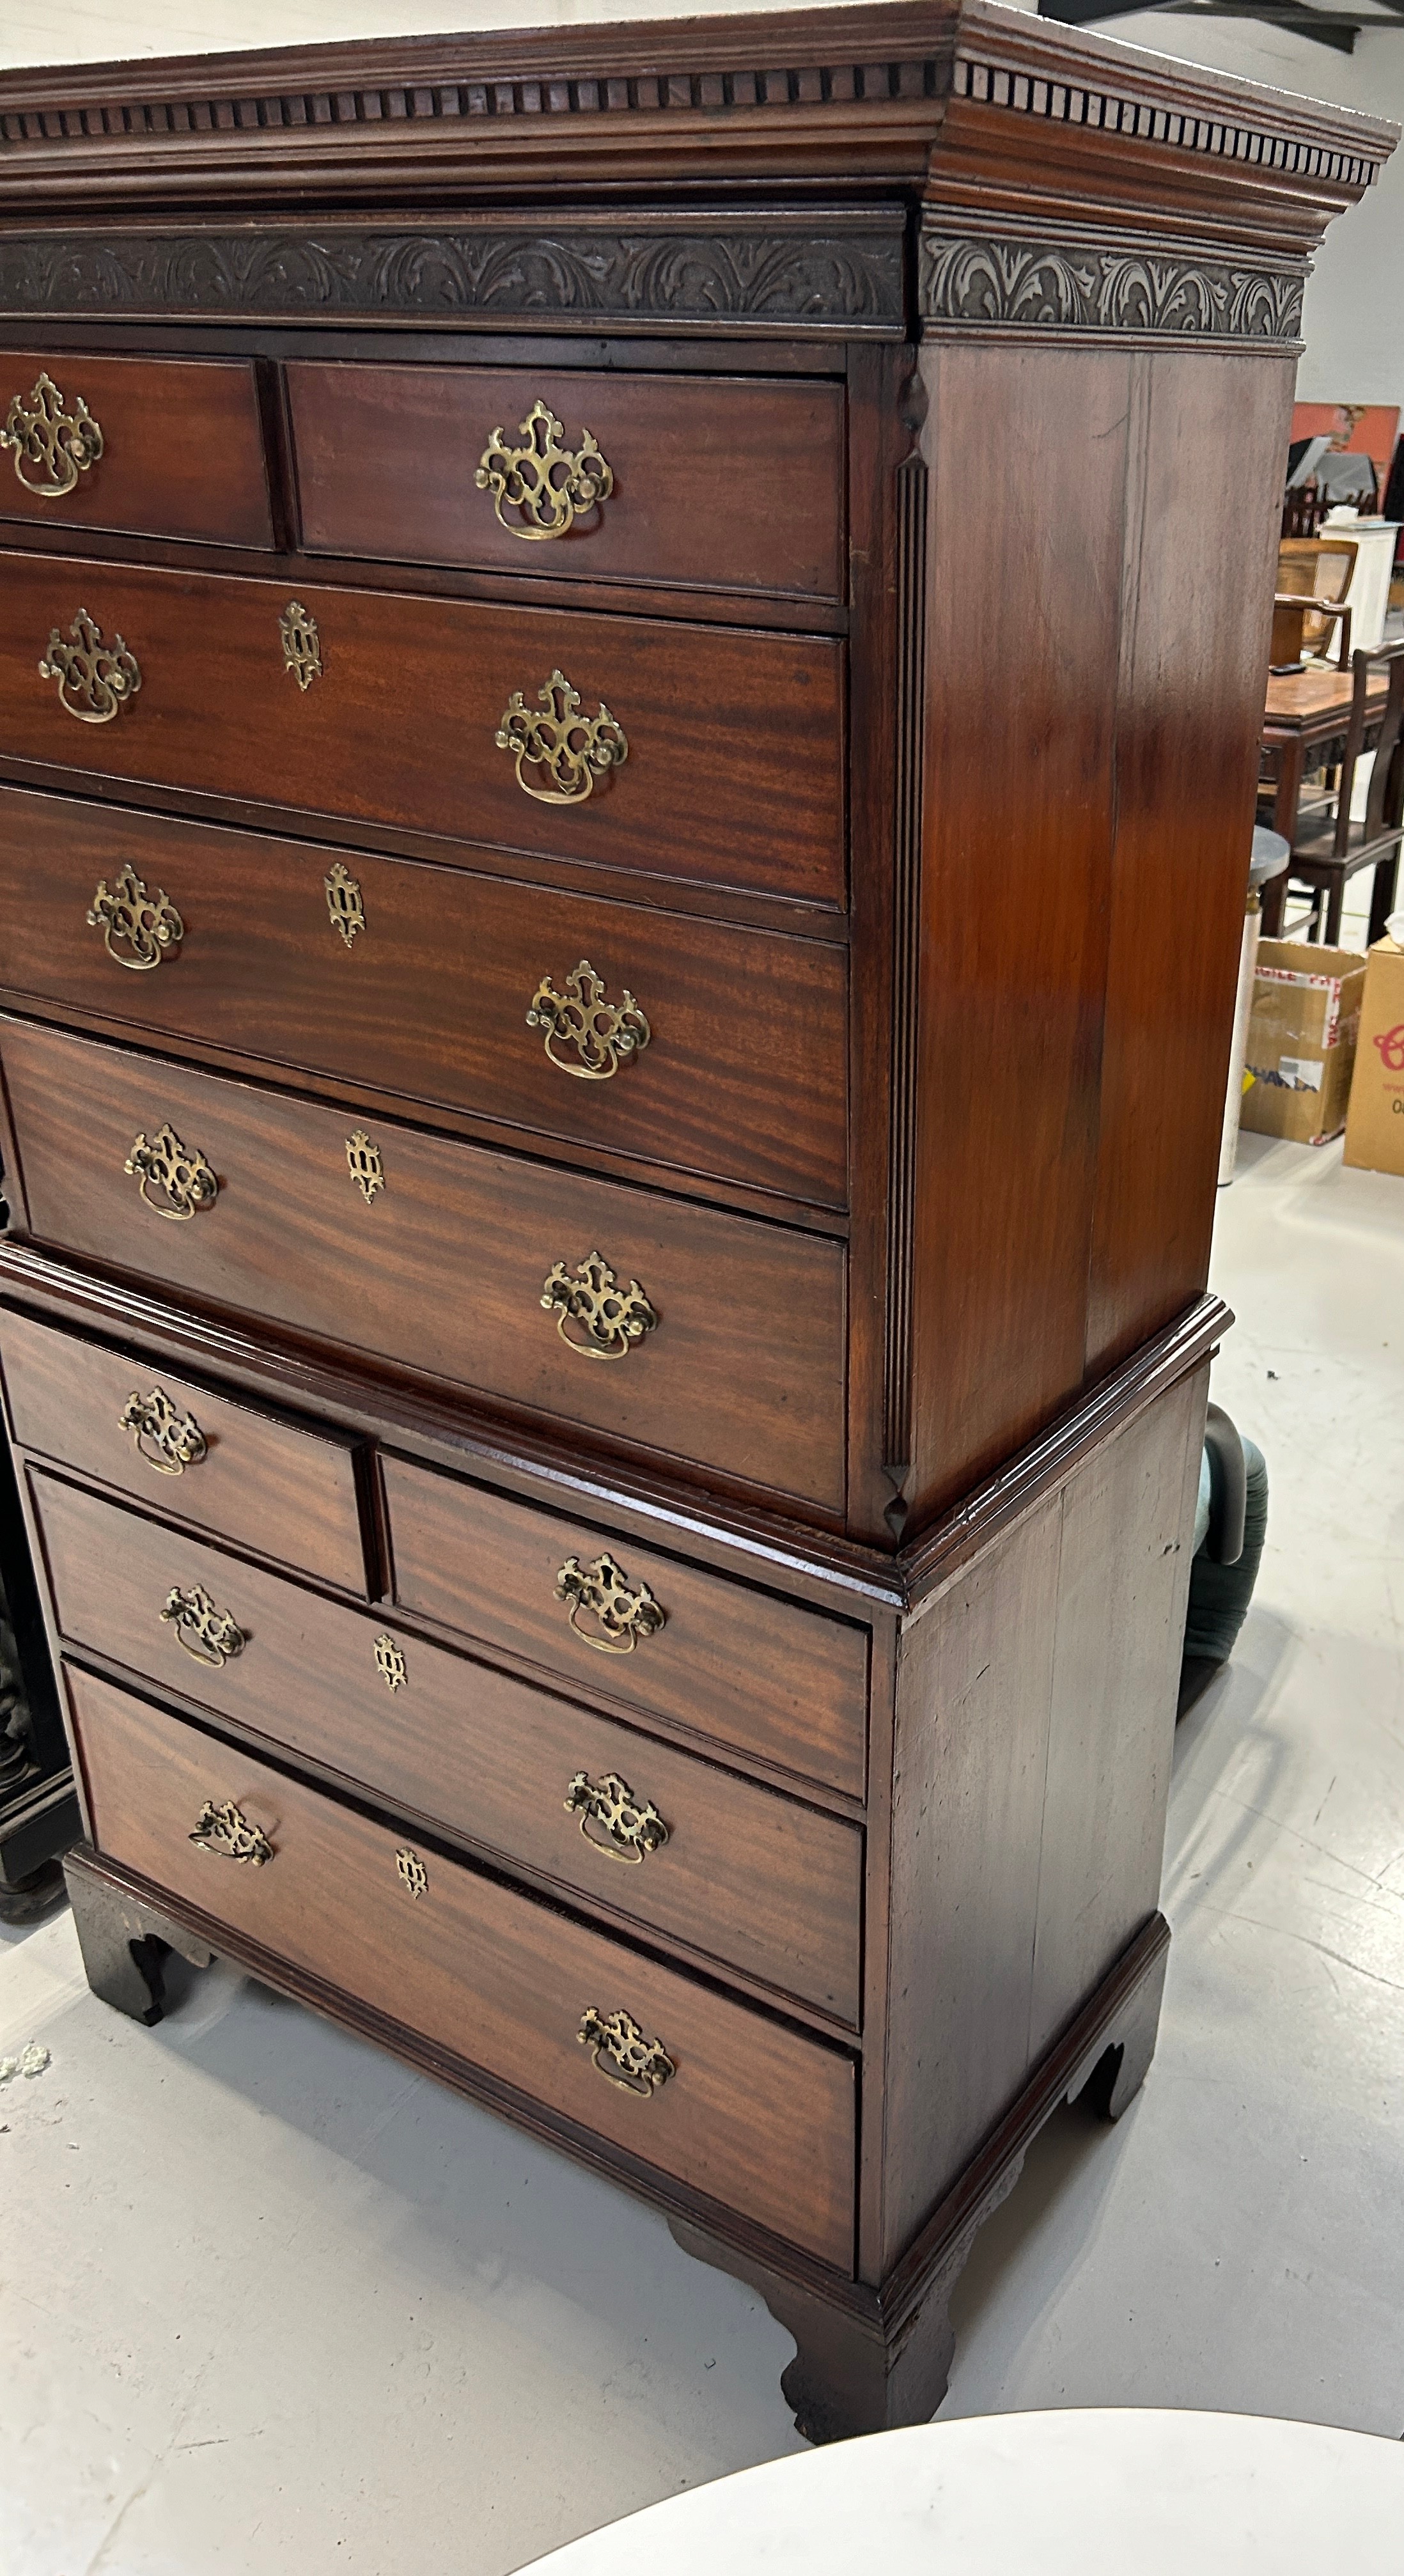 A GEORGE III MAHOGANY CHEST ON CHEST, Eight drawers in total with brass handles. 177cm x 107cm x - Image 4 of 4